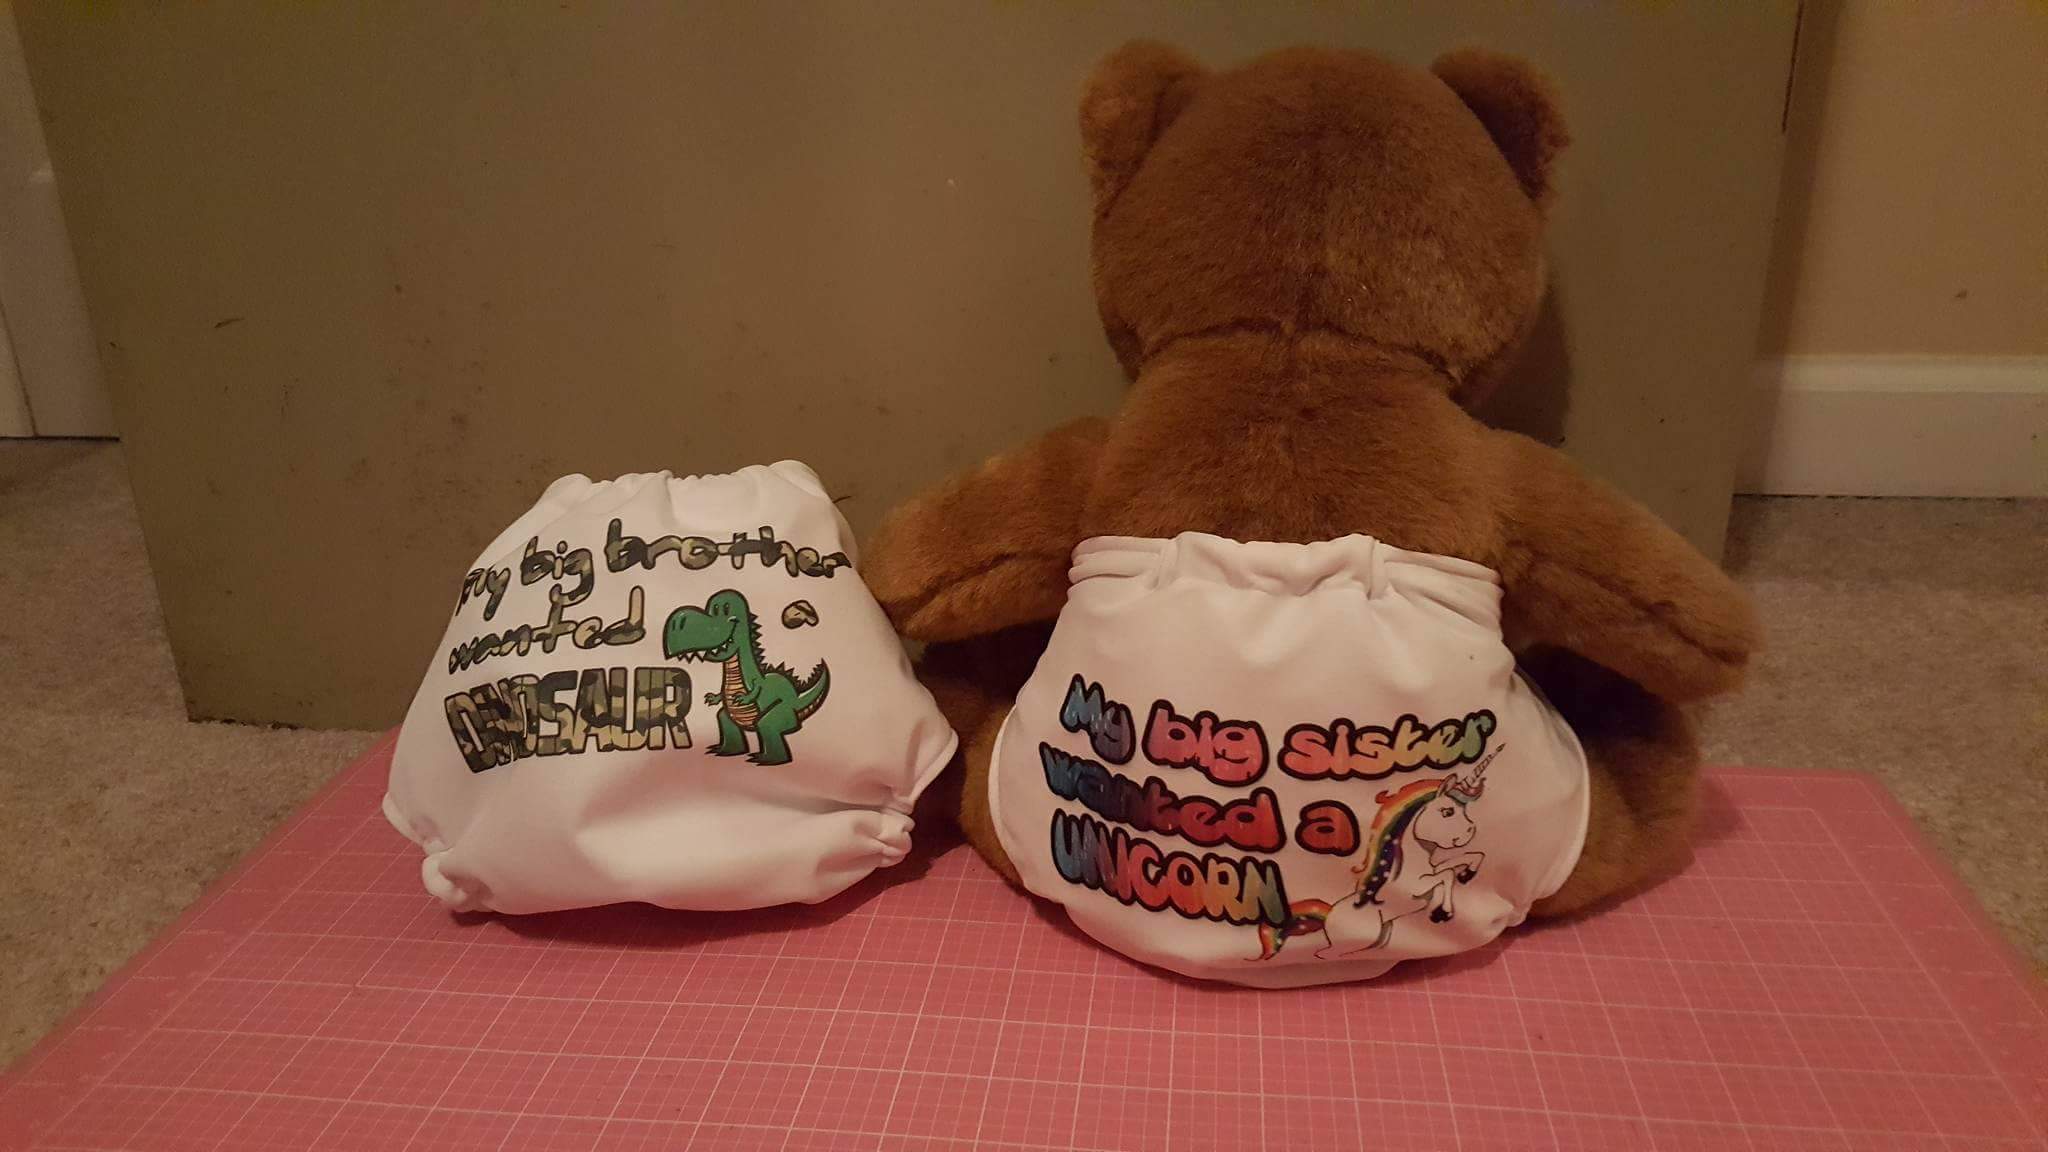 Custom printed cloth diapers made with sublimation printing